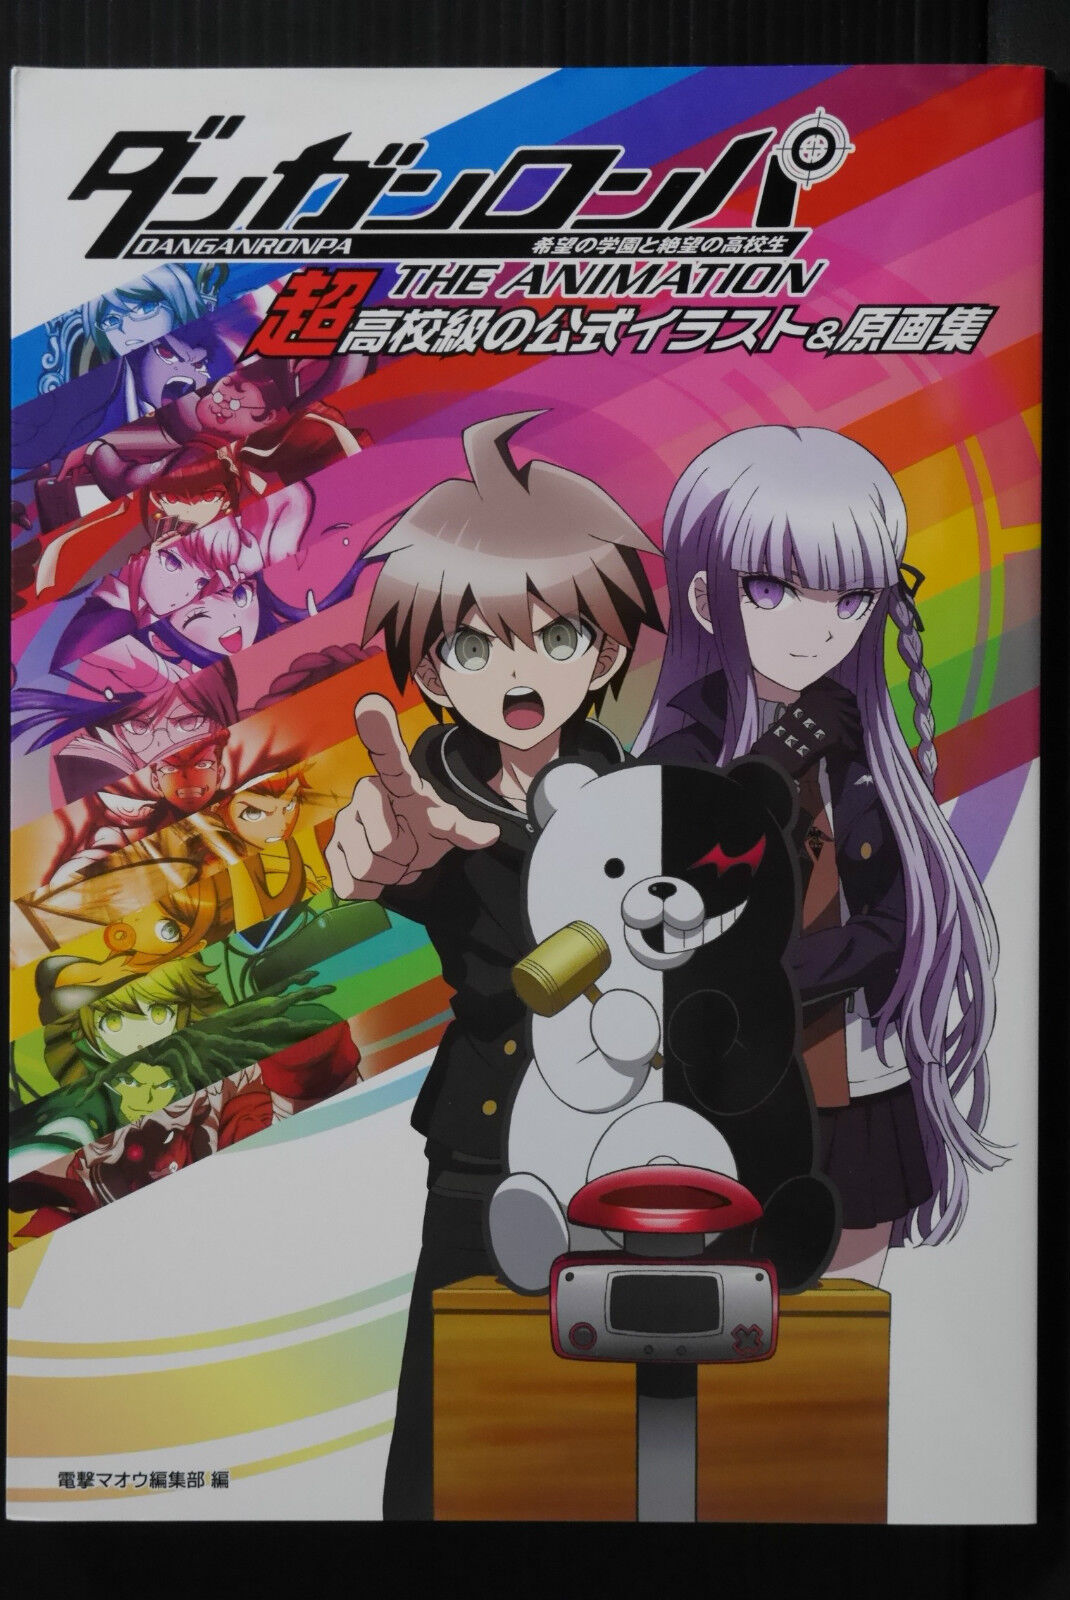 Danganronpa: The Animation Official Illustration & Sketches Art Book from Japan